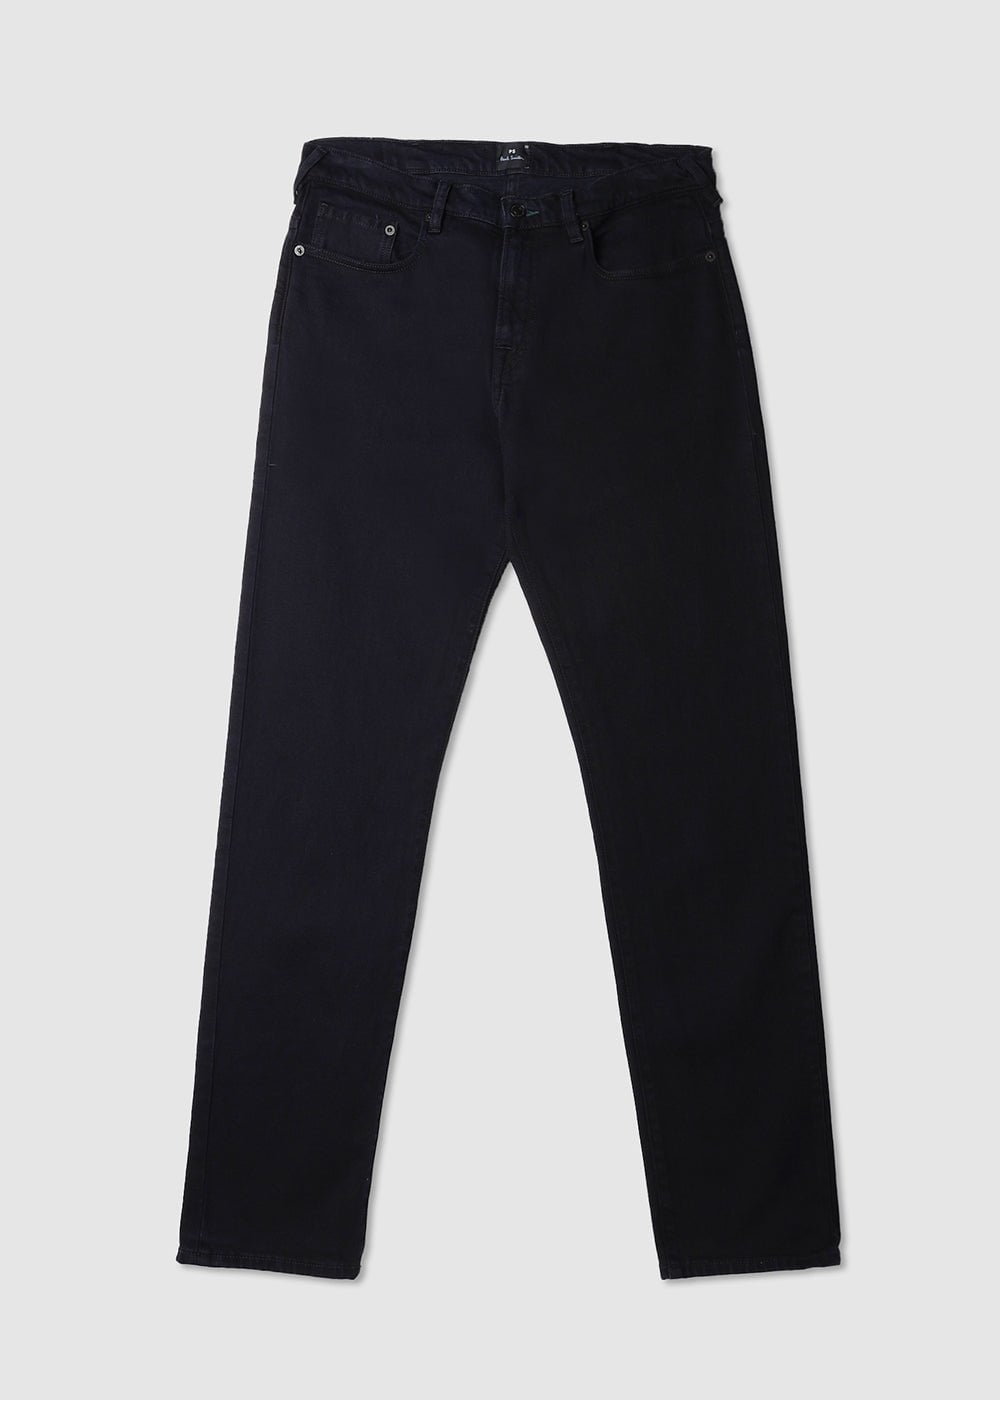 Paul Smith Mens Tapered Fit Jeans In Dark Blue